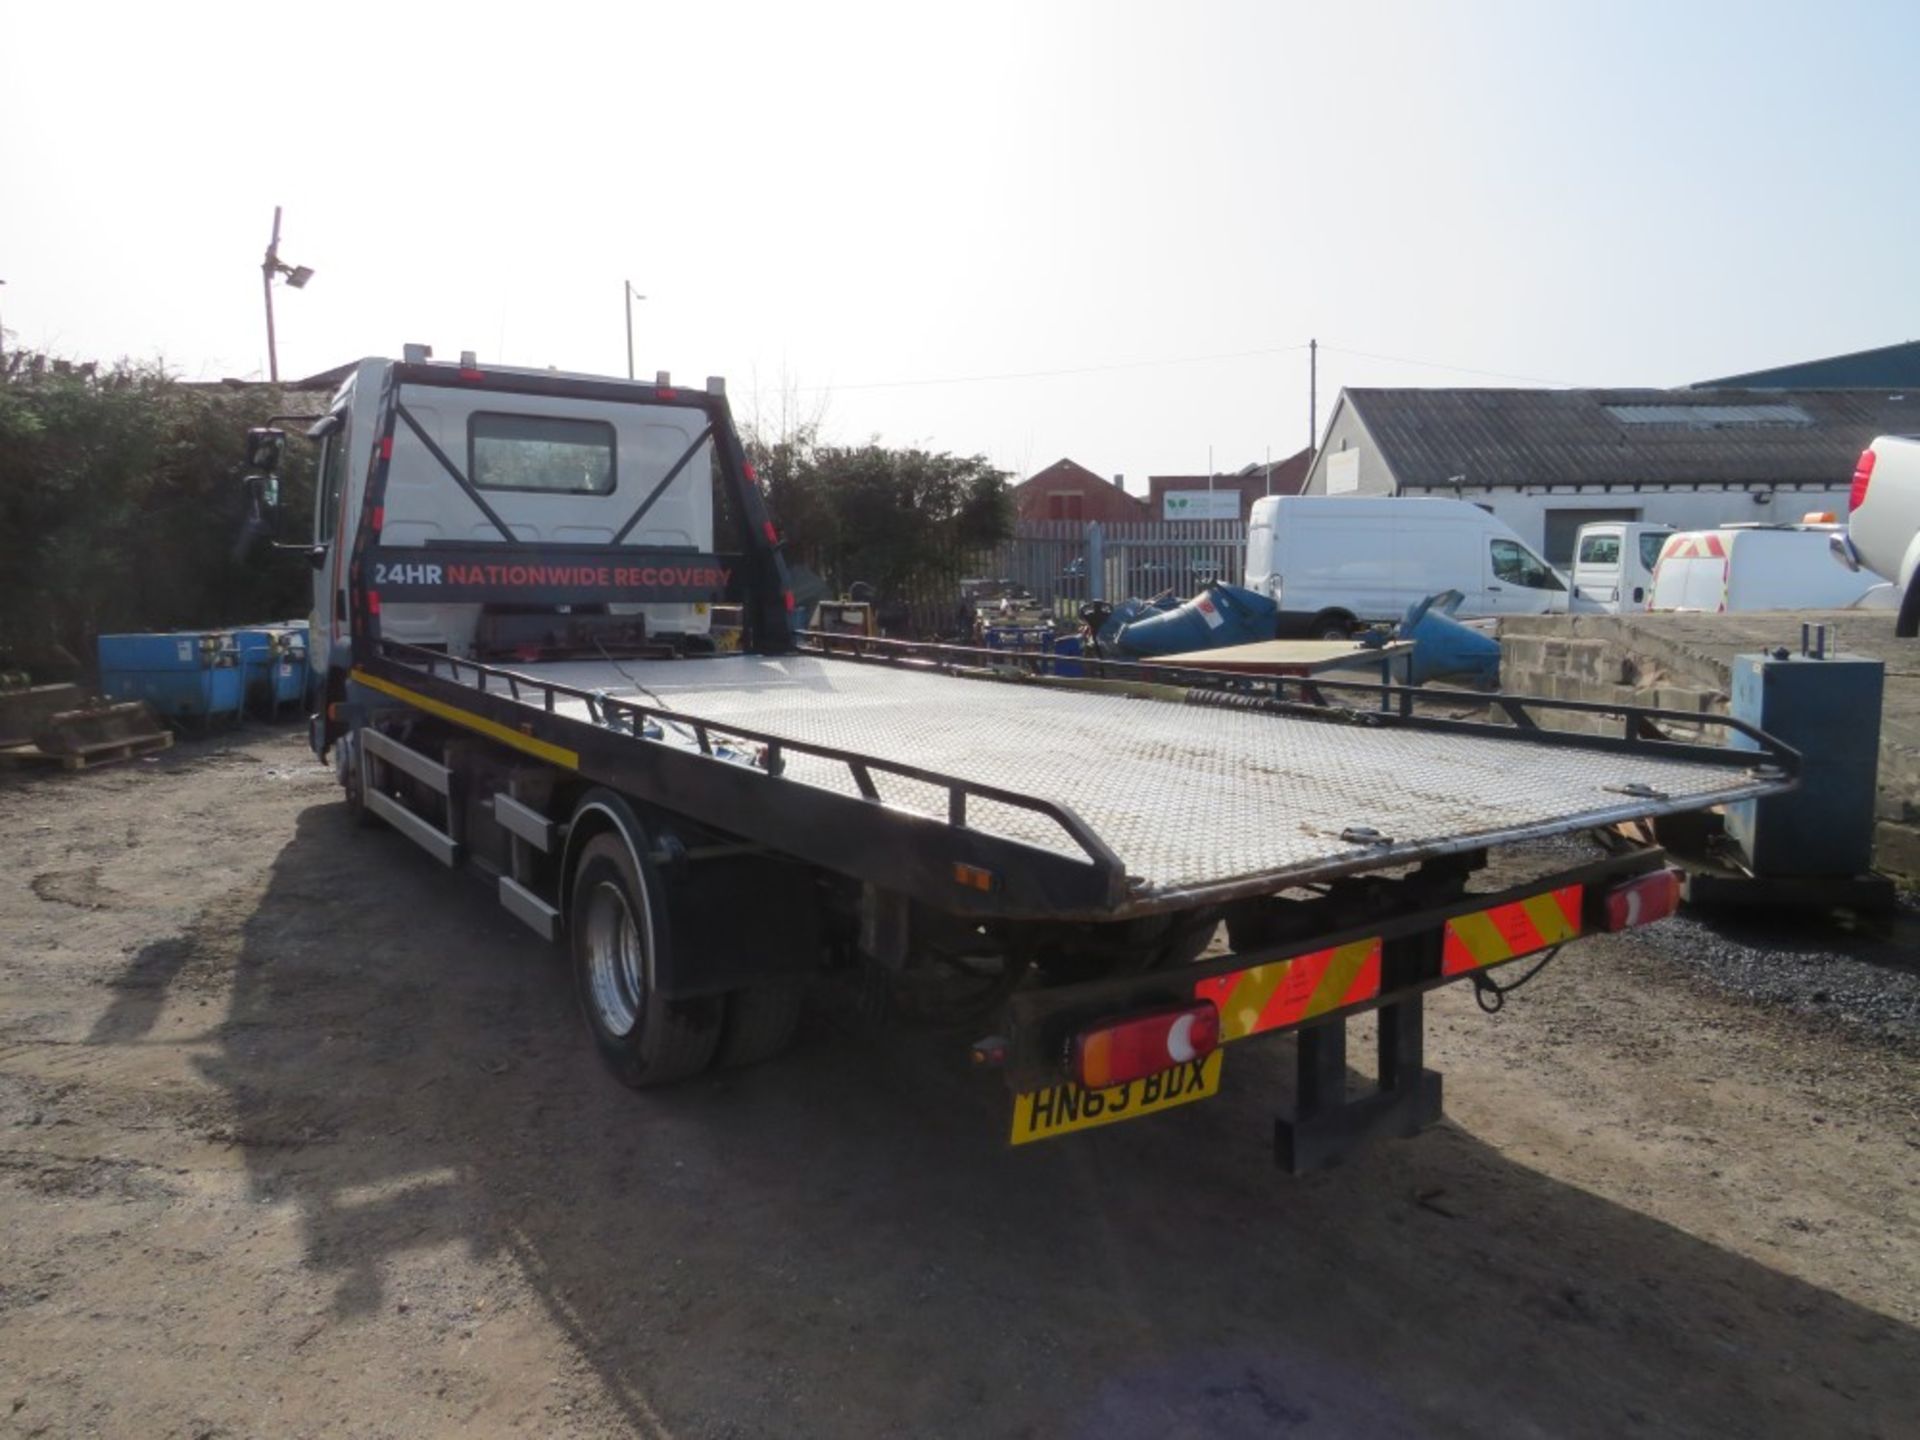 DAF 7.5t RECOVERY VEHICLE, 1ST REG 12/13, 179276M, V5 HERE, 3 FORMER KEEPERS [NO VAT] - Image 2 of 5